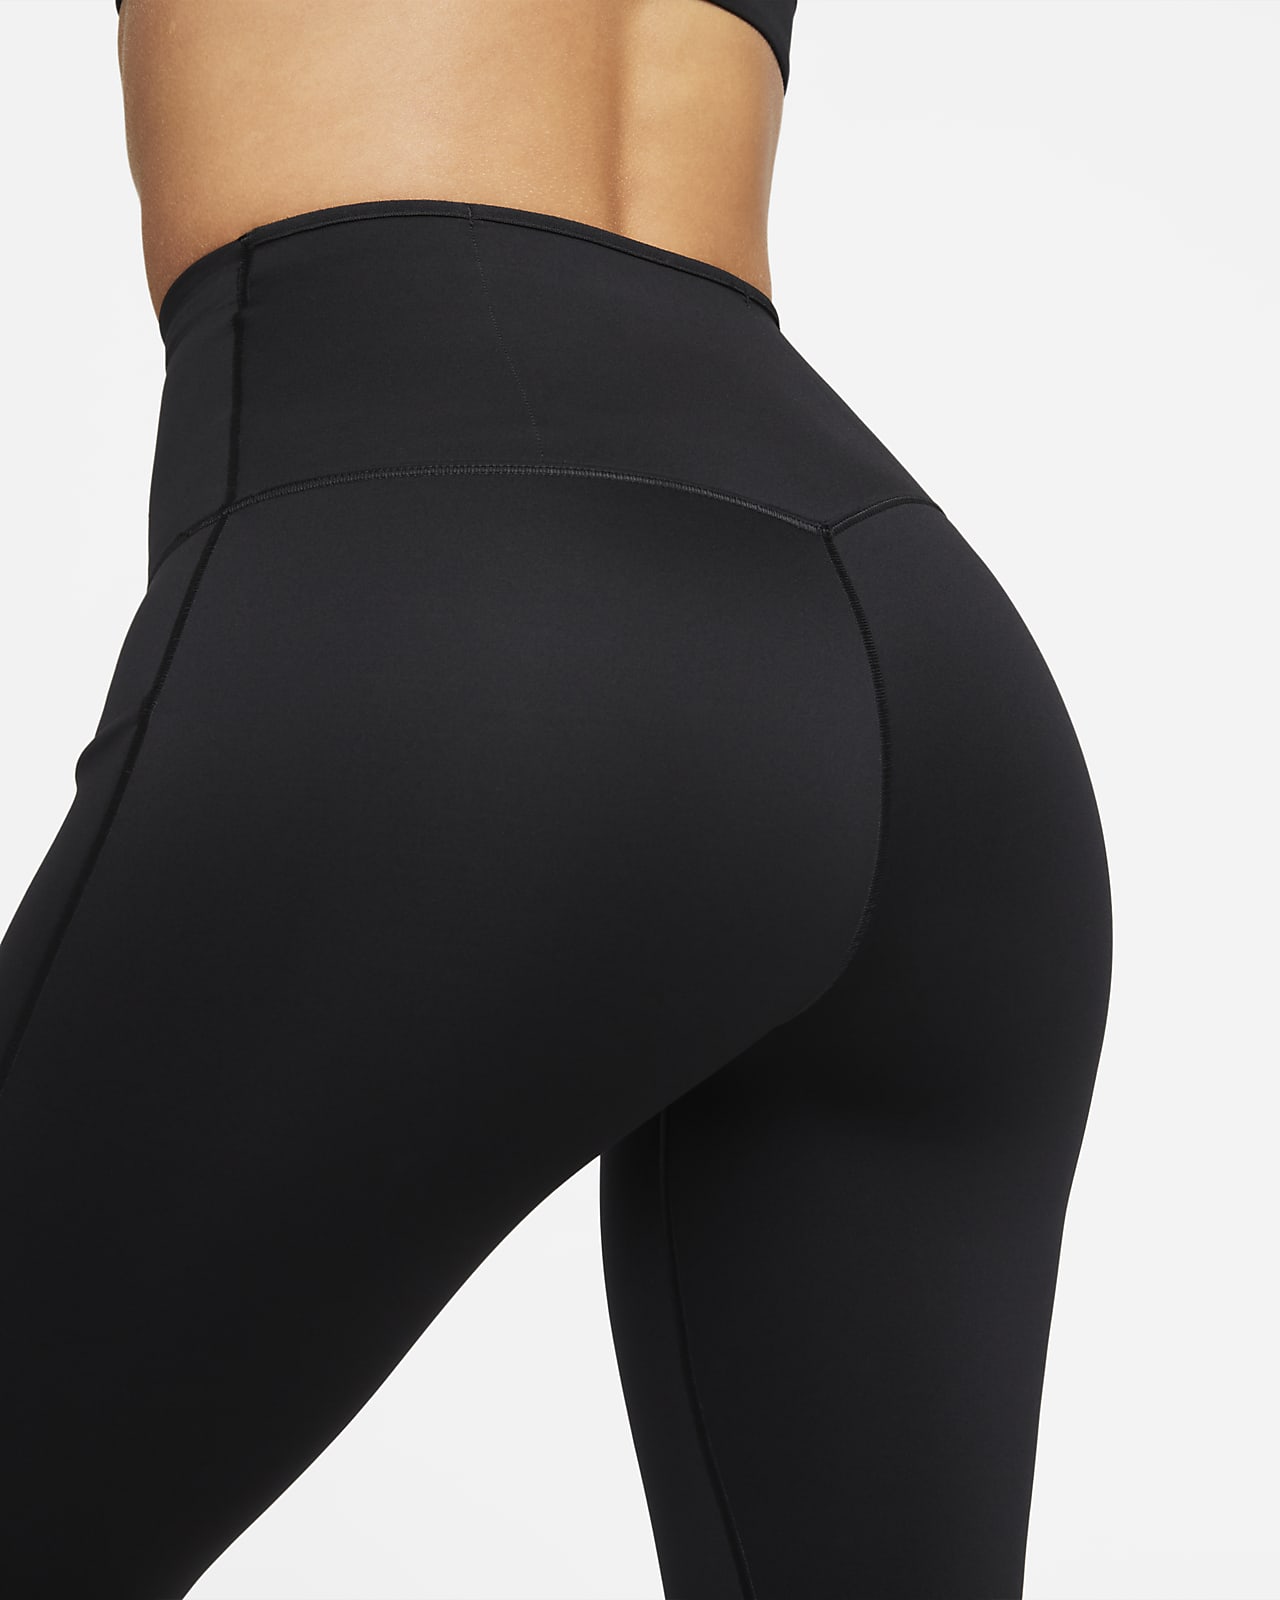 Nike Go Women's Firm-Support High-Waisted Capri Leggings with Pockets.